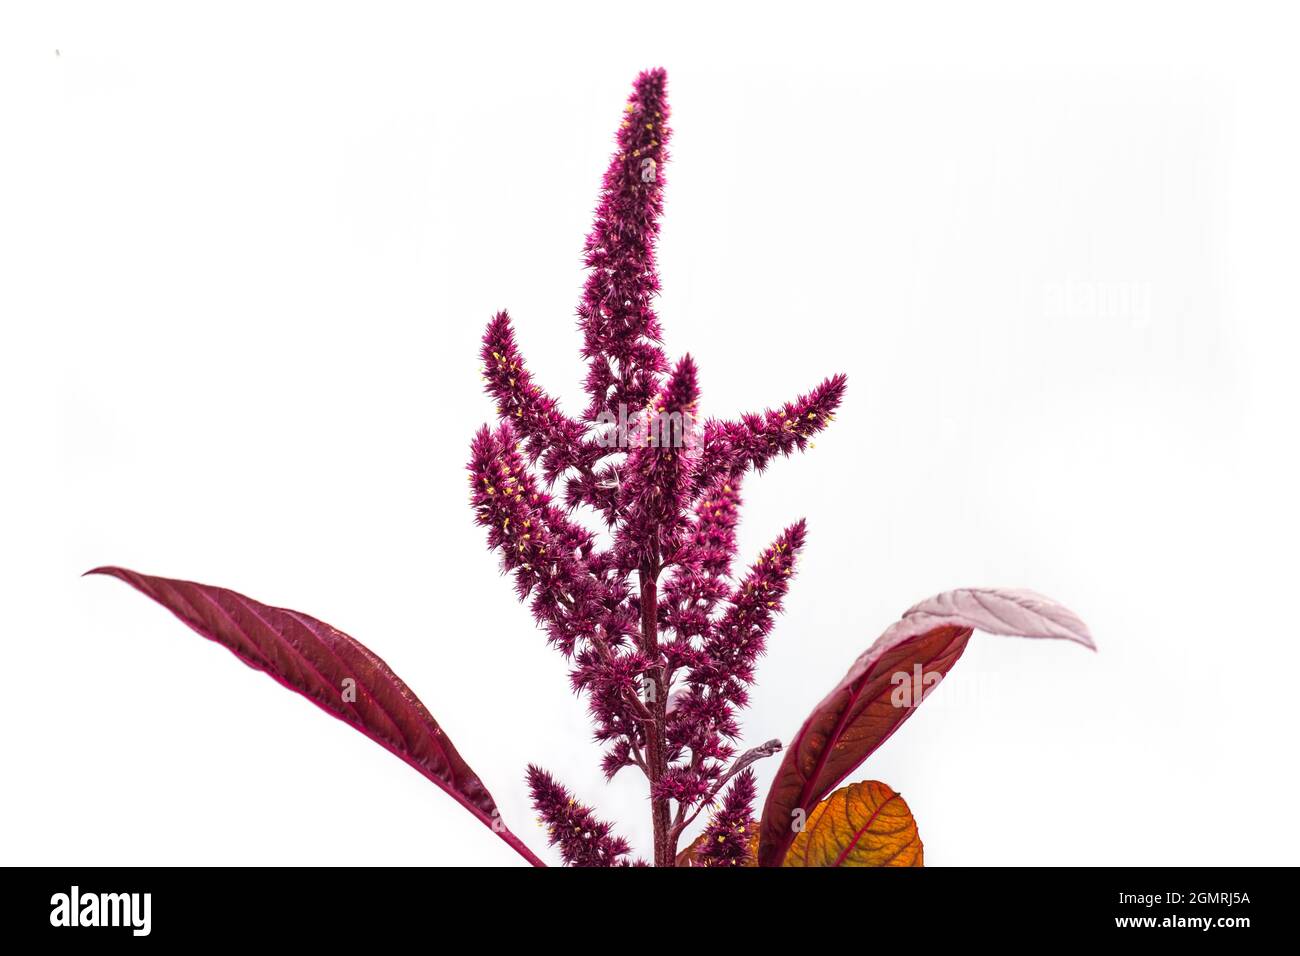 Flowers with seeds of vegetable amaranth on a white background. Stock Photo